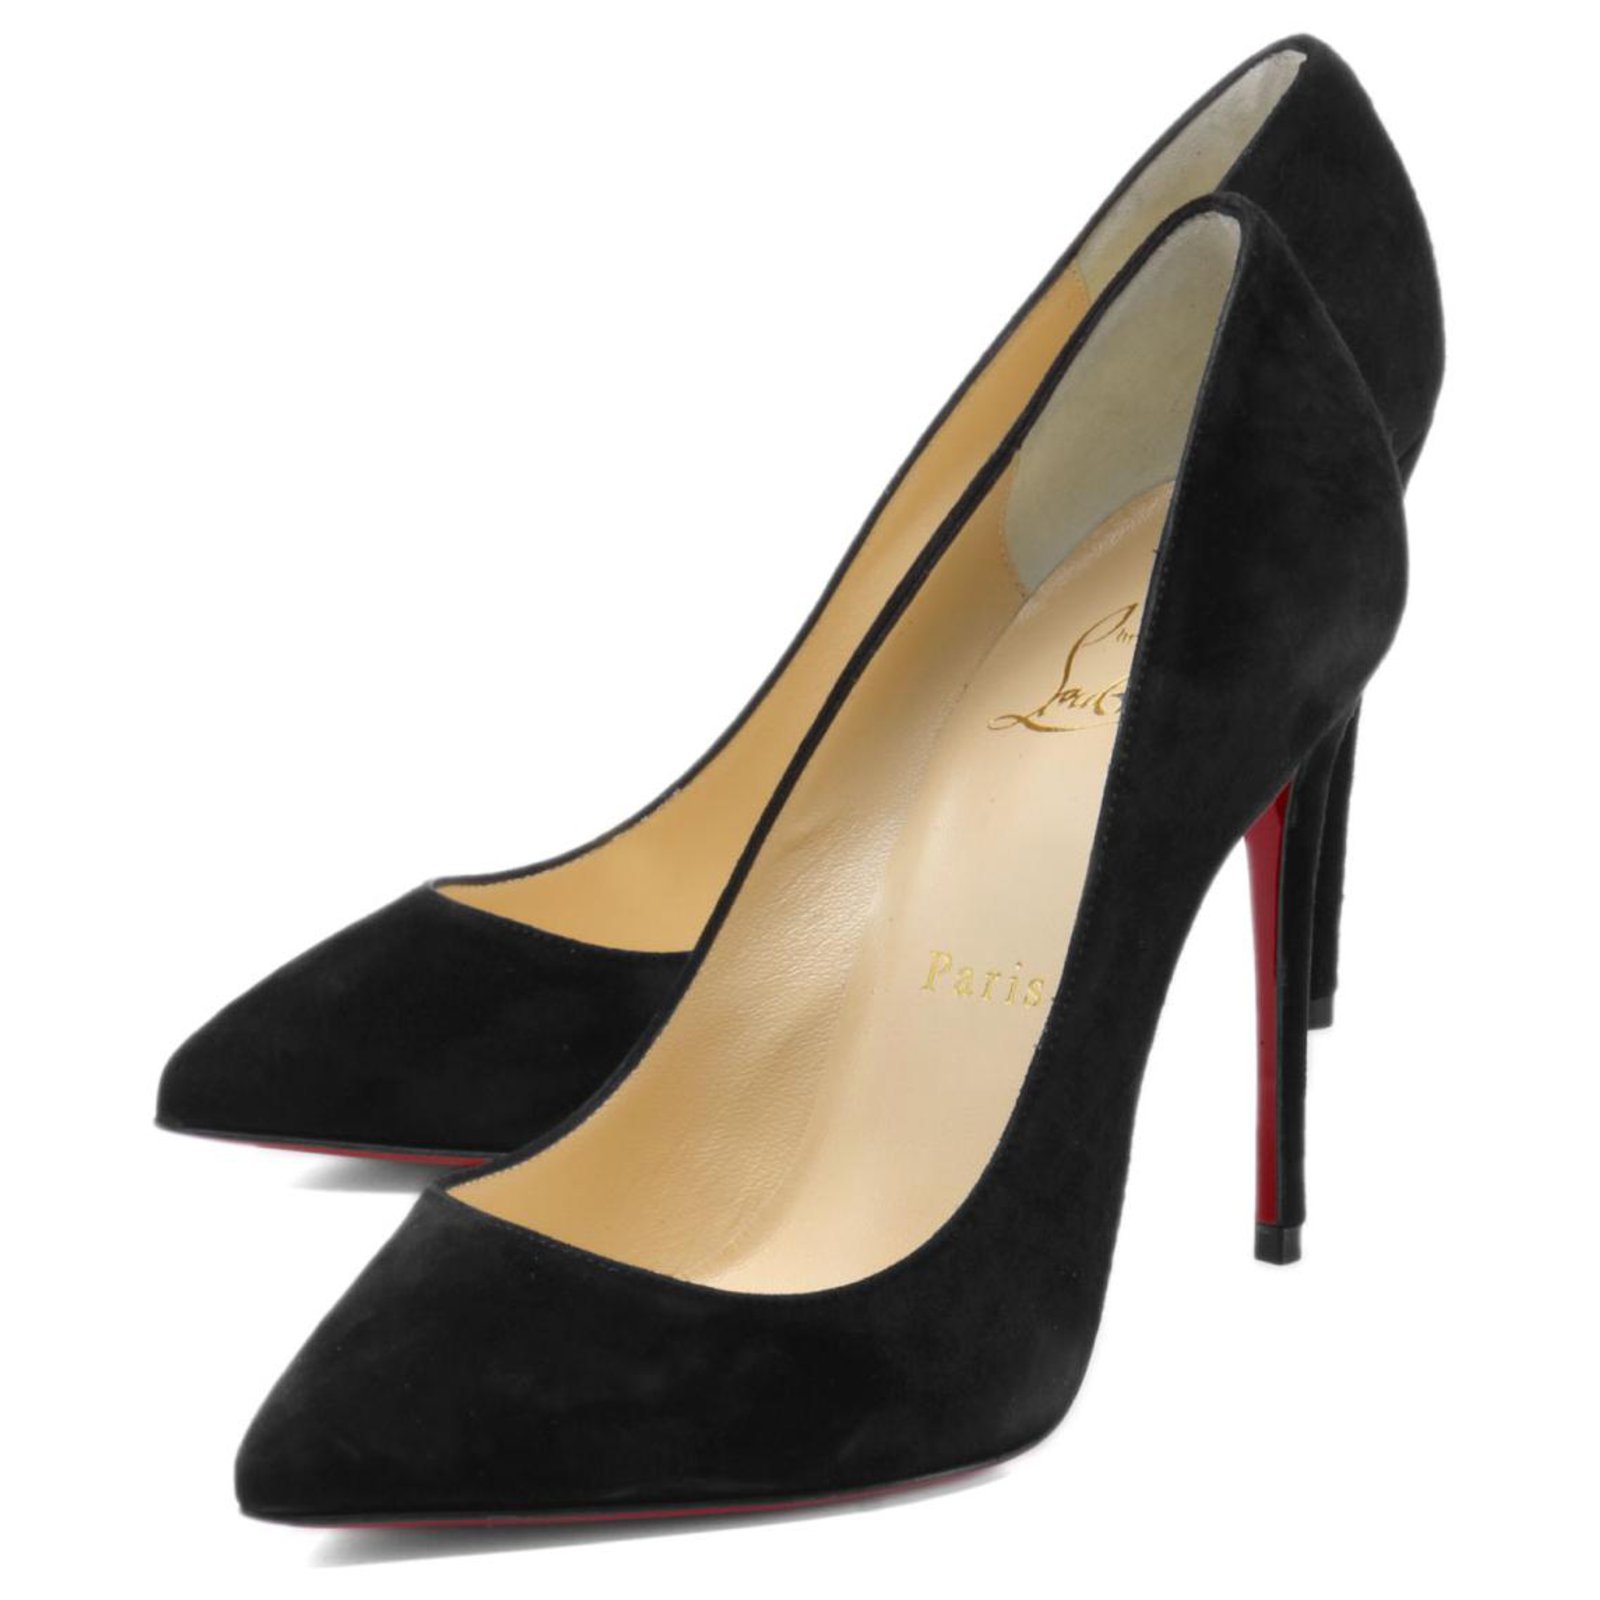 Chaussures Christian Louboutin pour femme